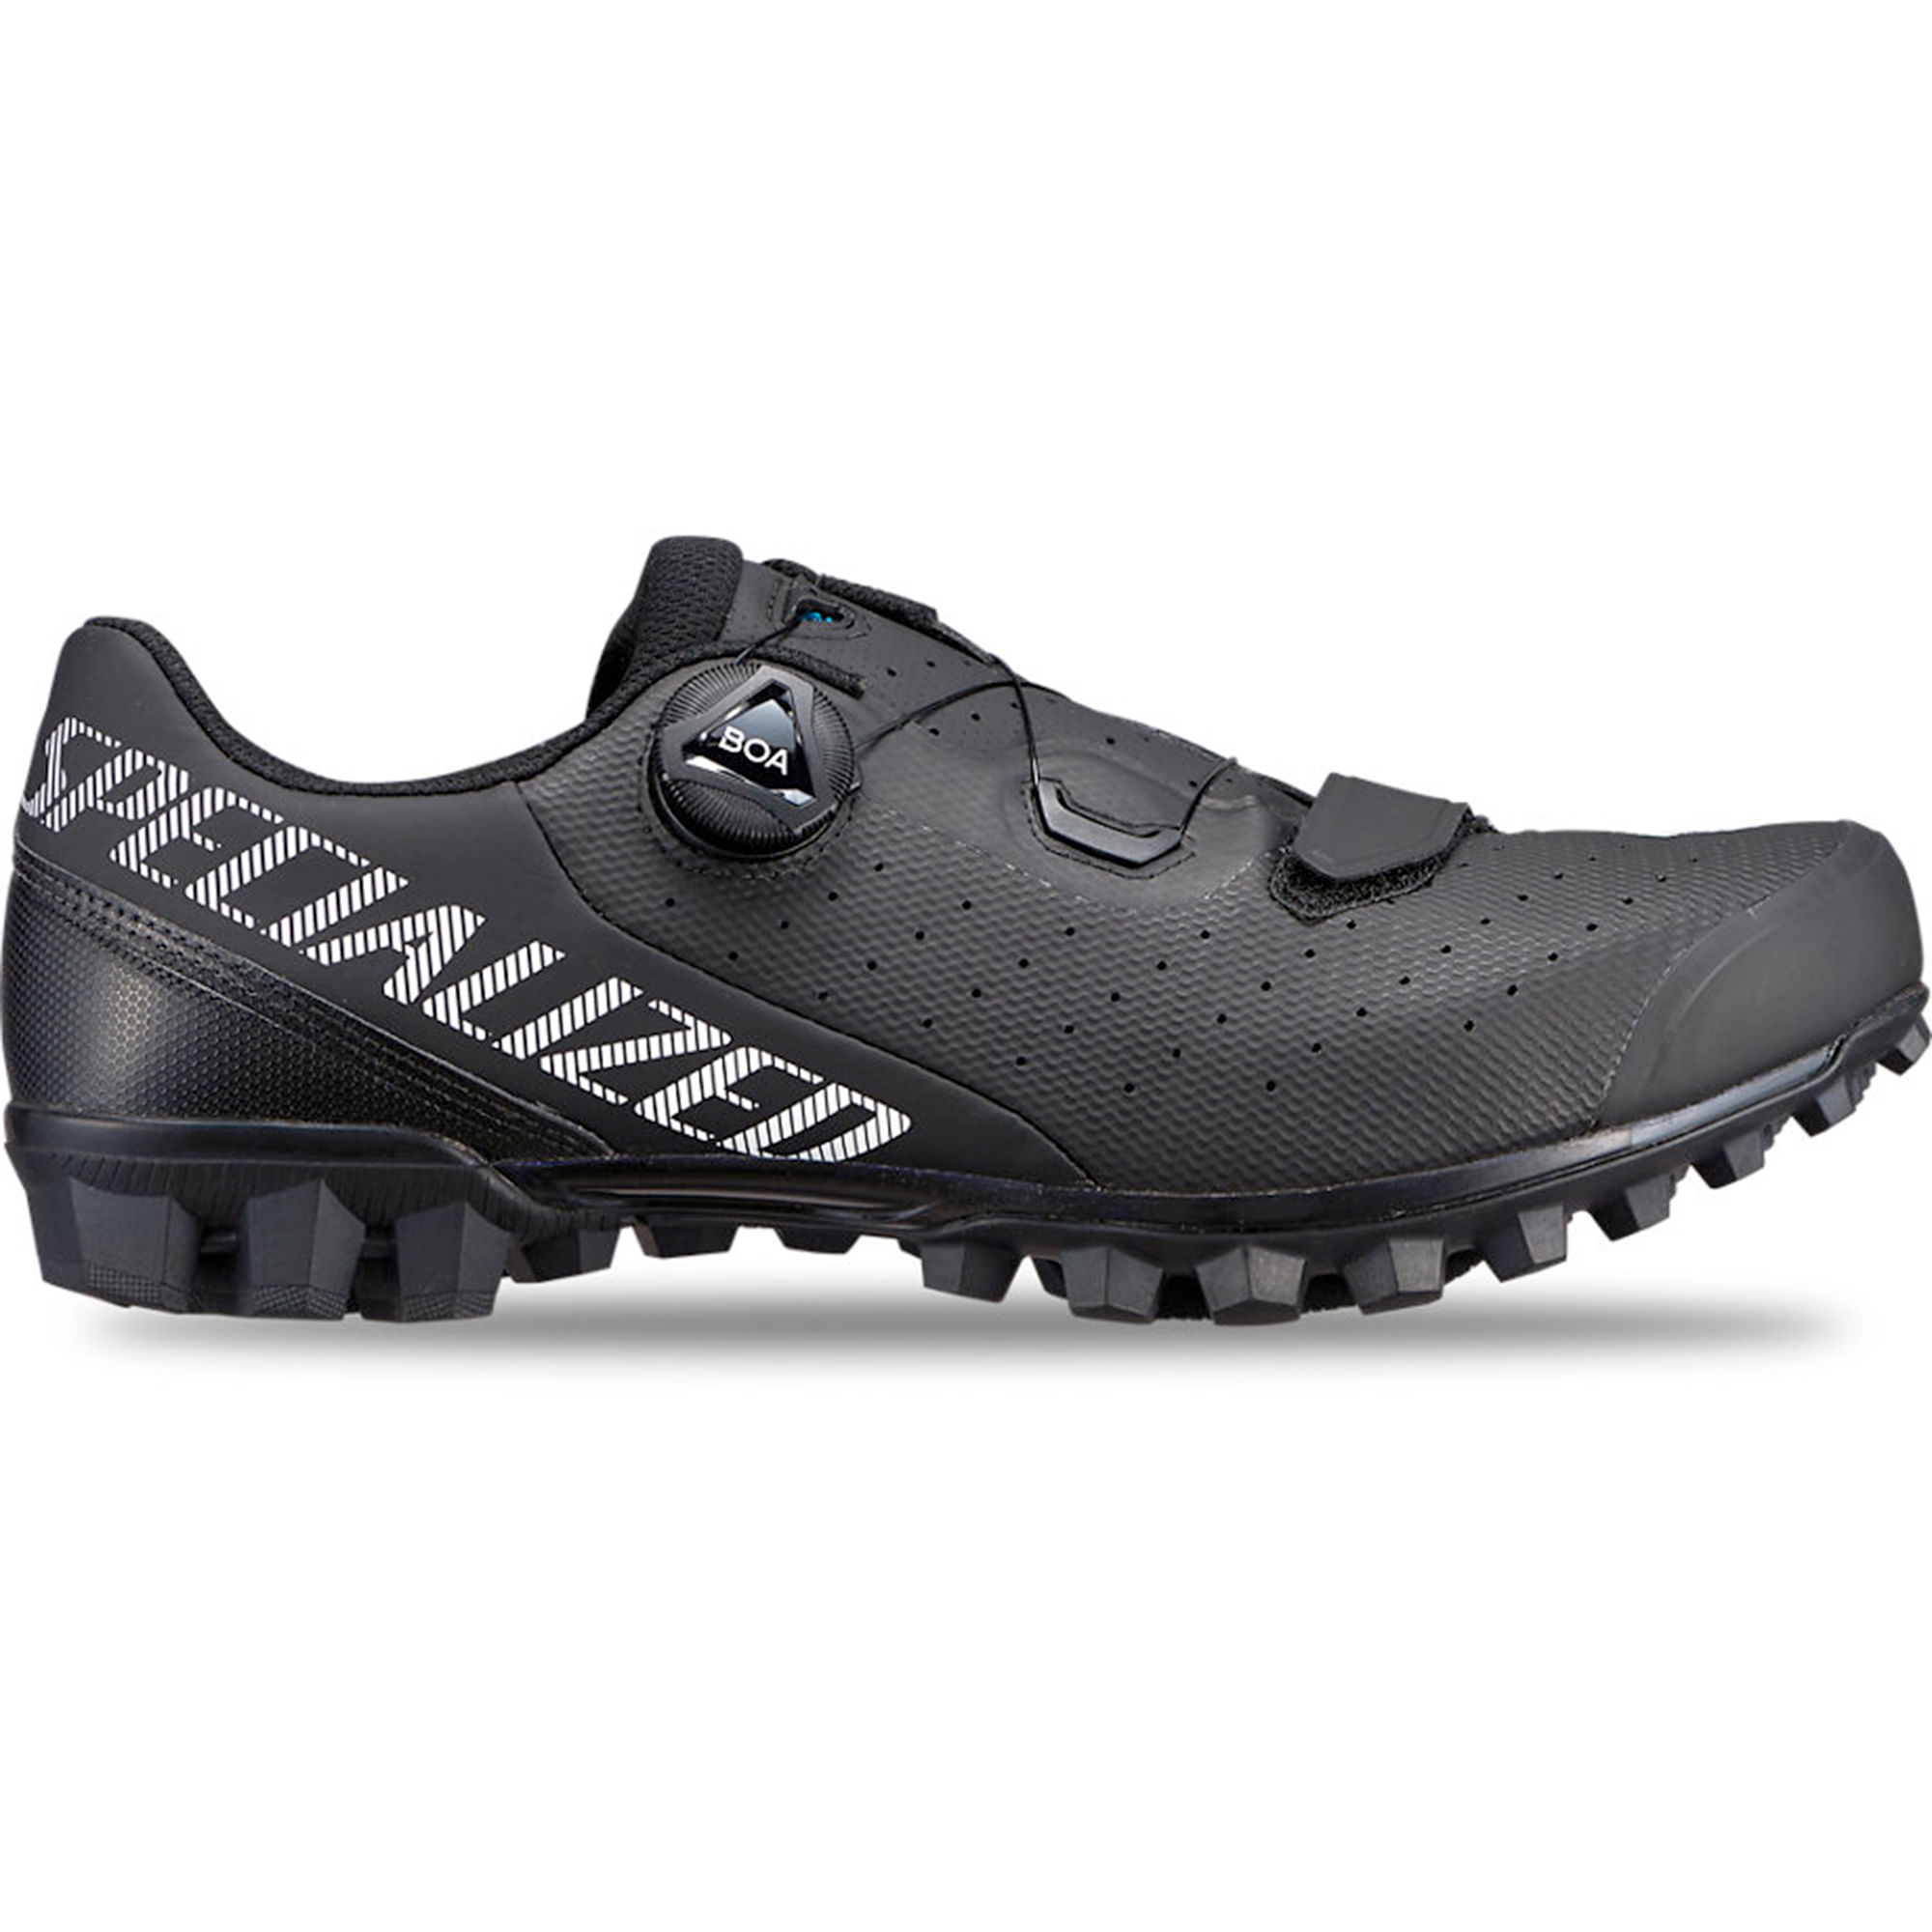 Specialized RECON 2.0 SHOE BLACK Cycling Shoes